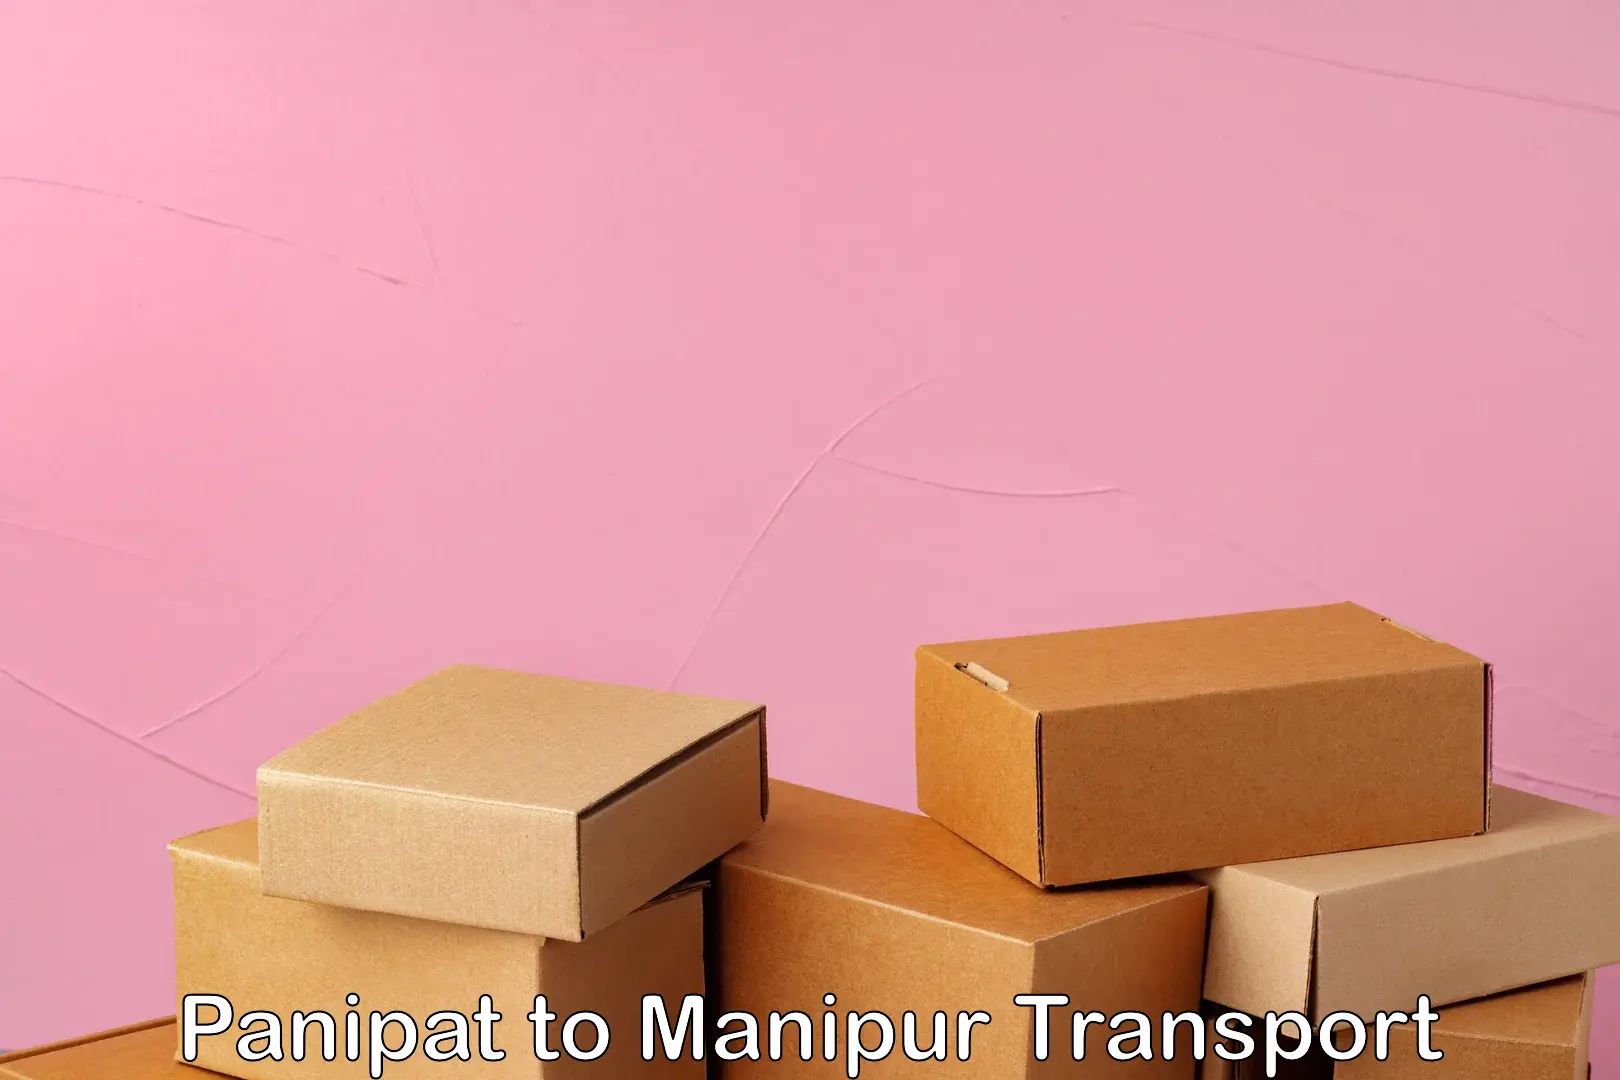 Nearby transport service Panipat to Manipur